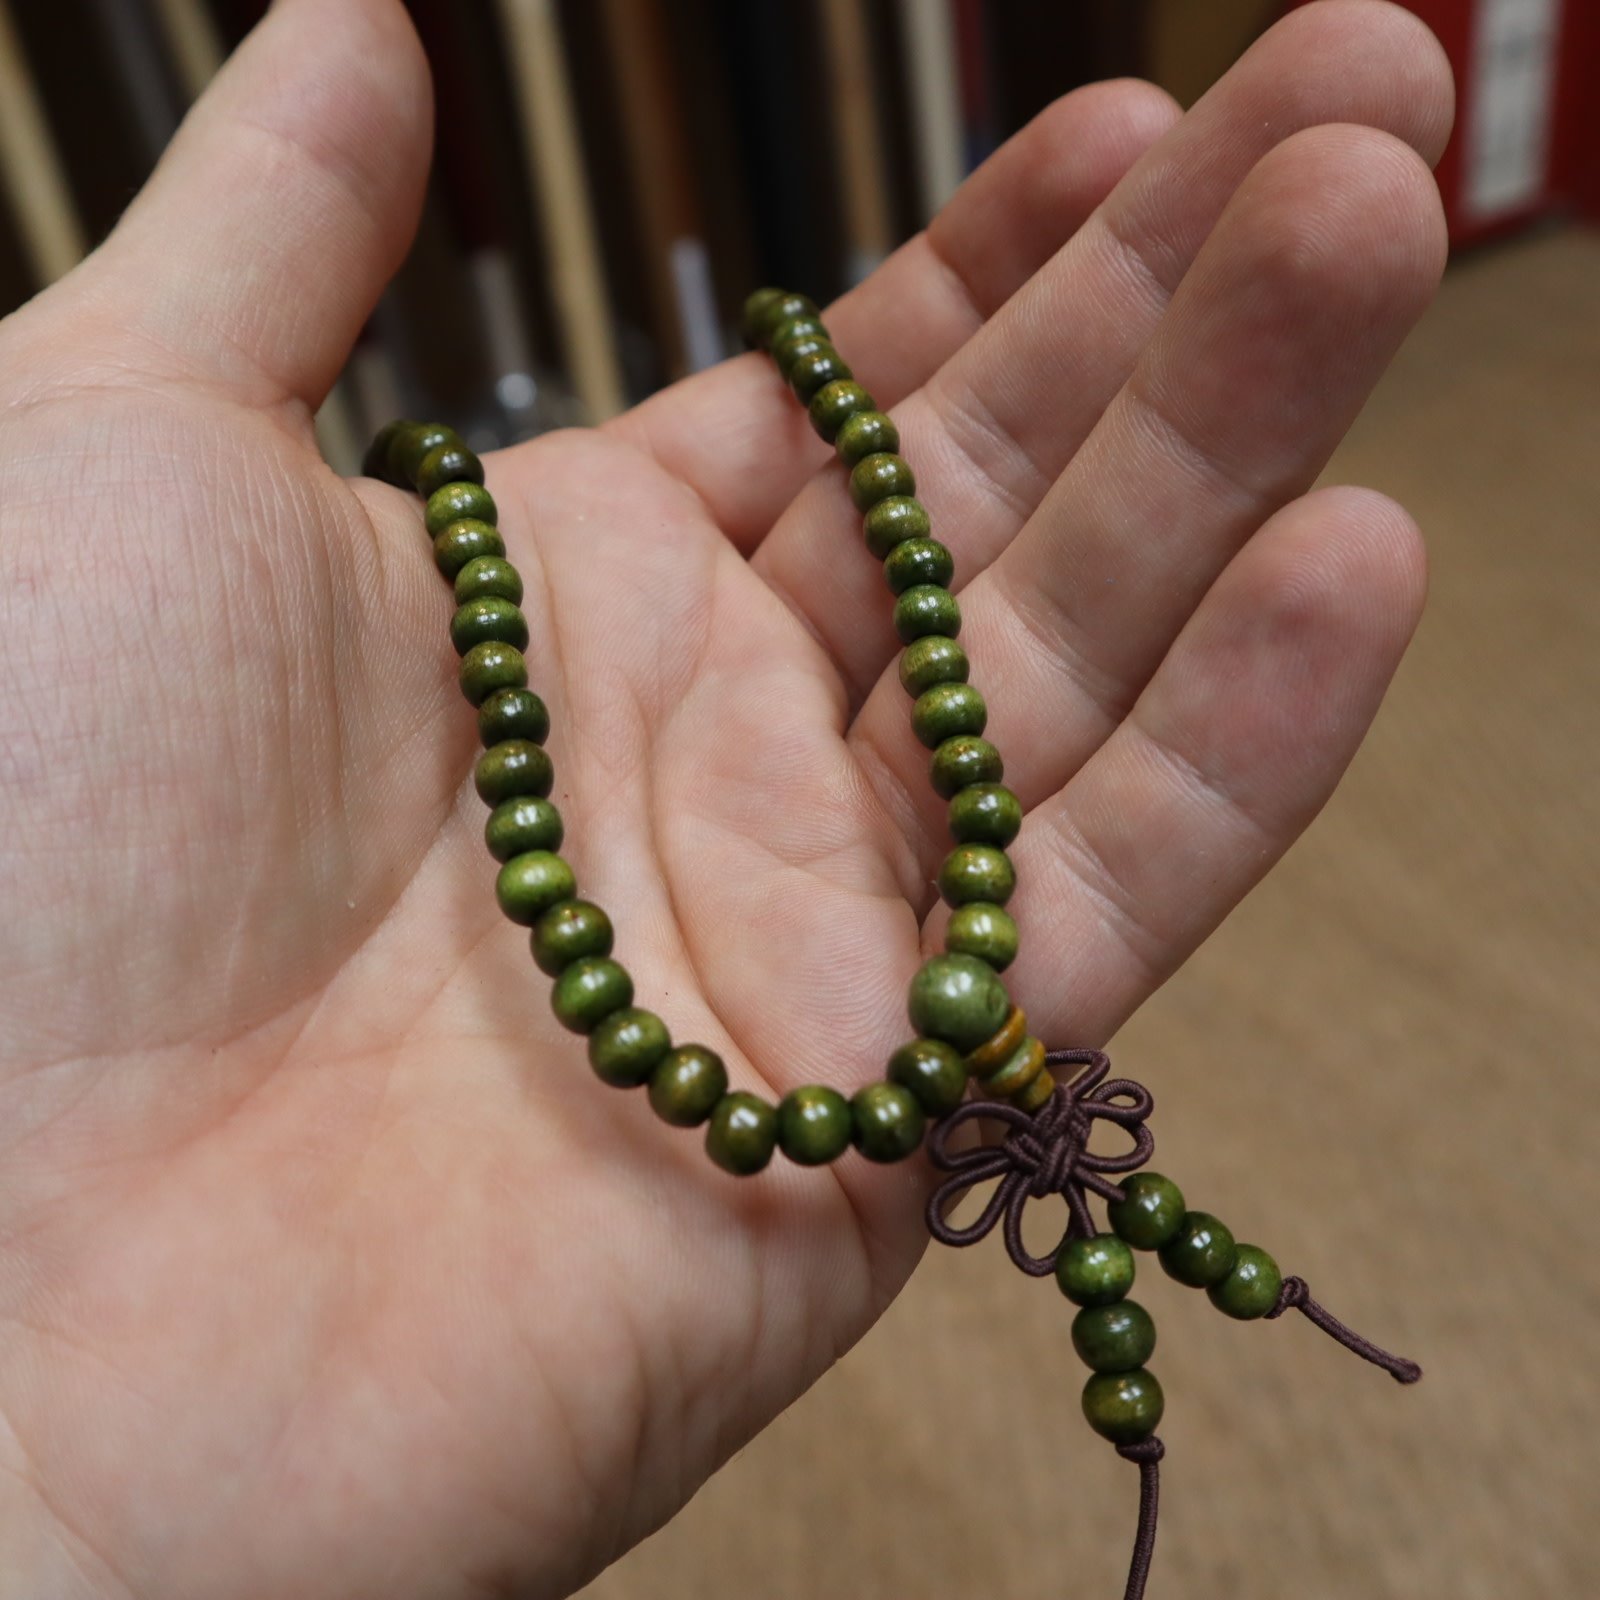 Green Buddhist Mala Beads from Shaolin Temple China - Enso Martial